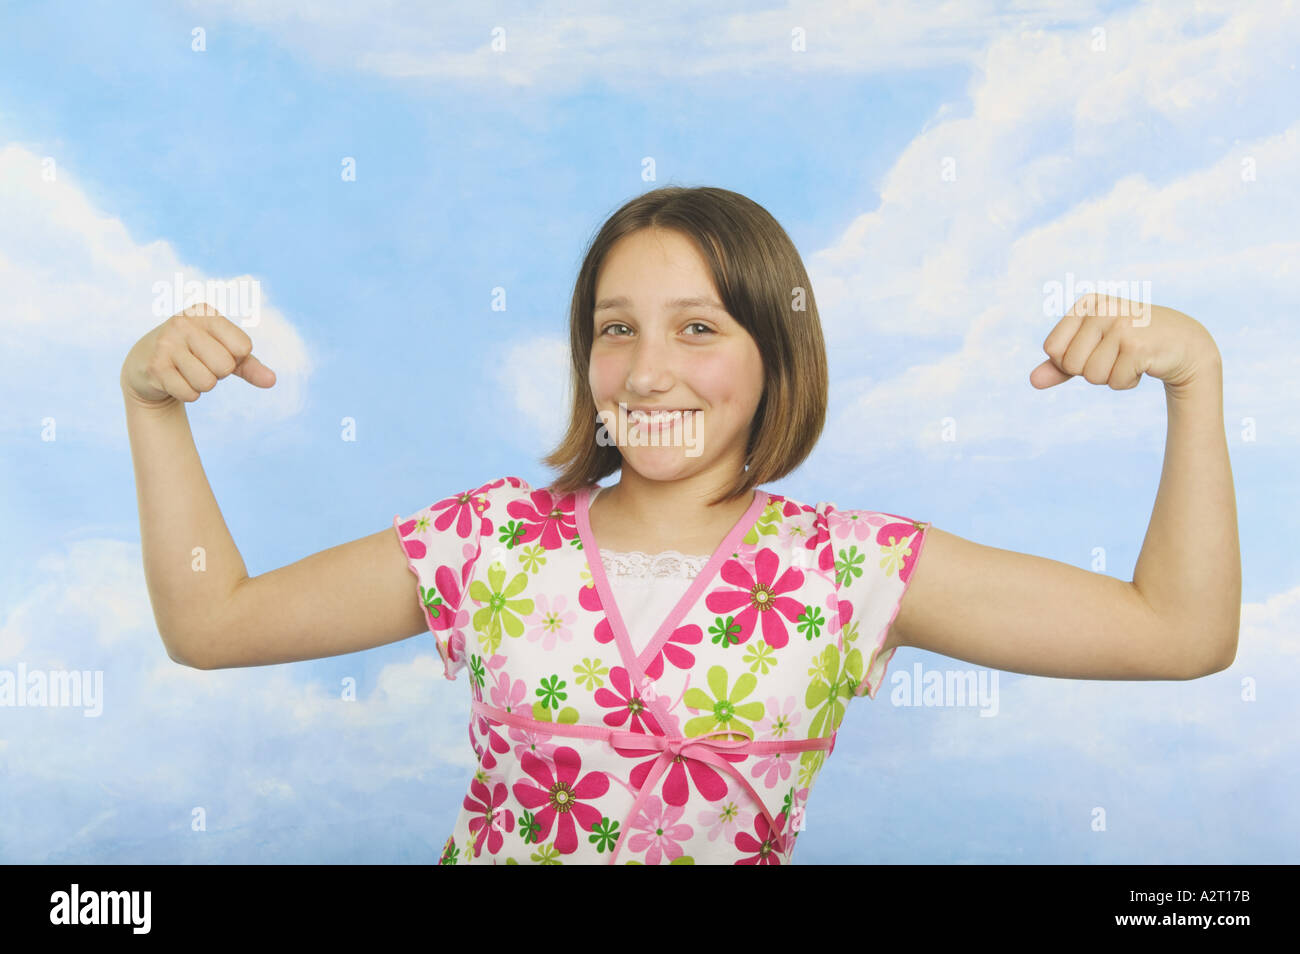 A teenaged girl flexing her muscles Stock Photo